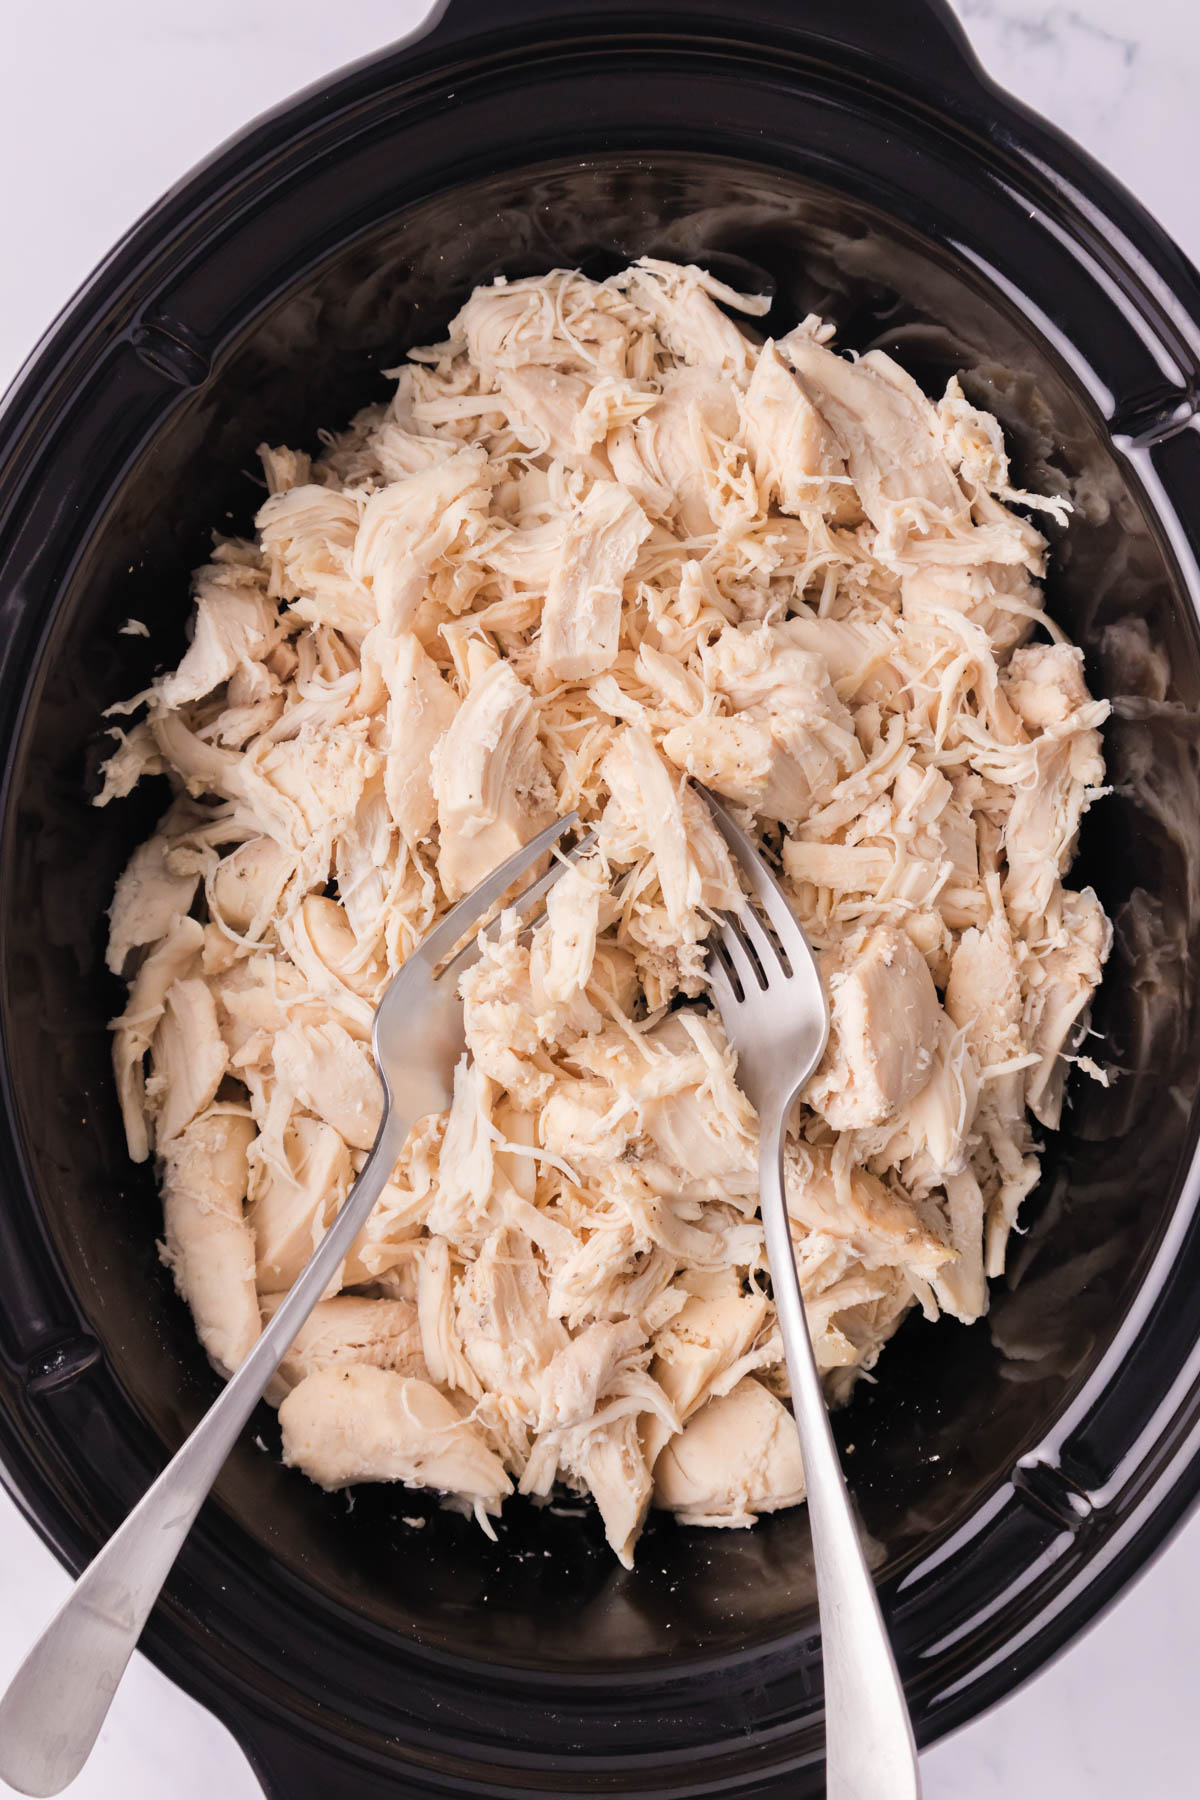 An overhead image of cooked shredded chicken in a crock pot with two forks.